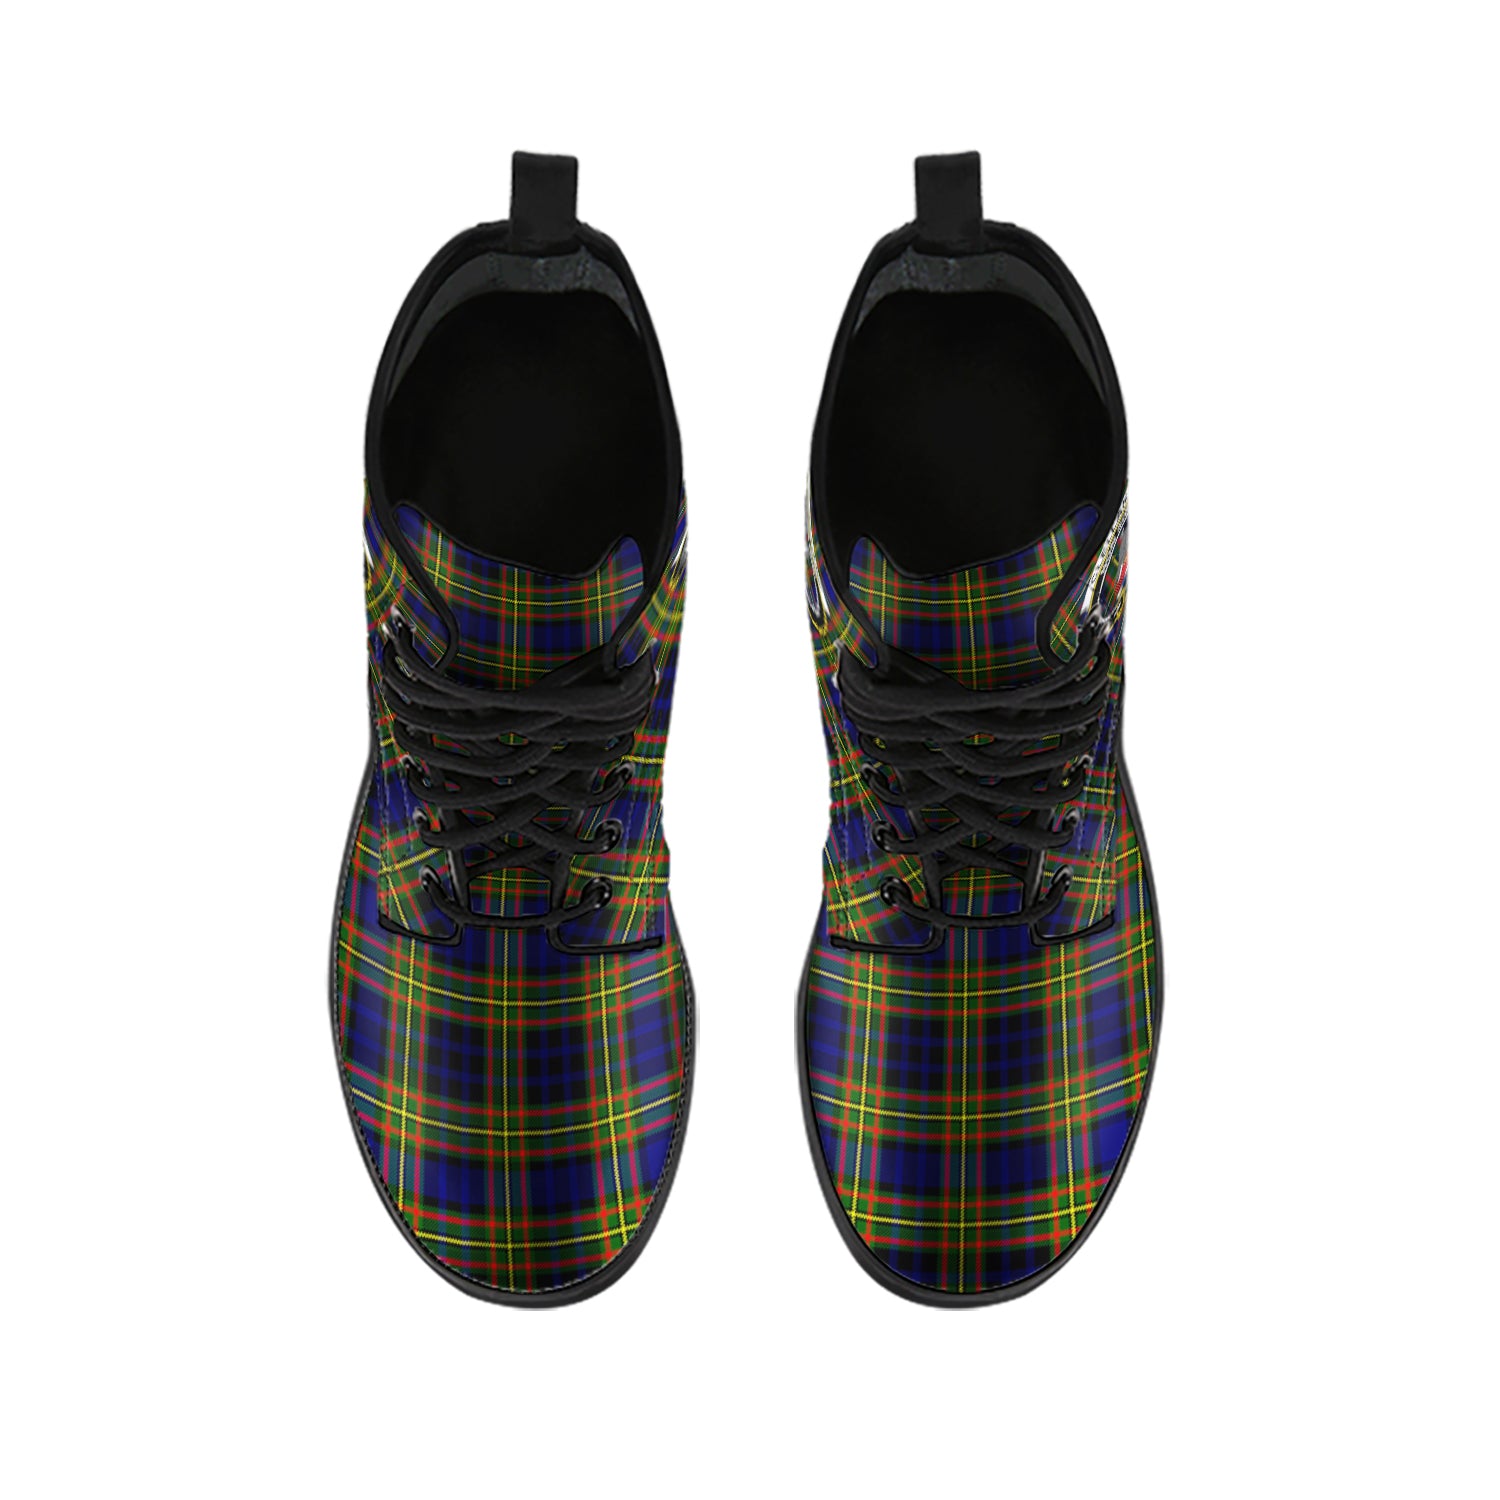 clelland-modern-tartan-leather-boots-with-family-crest